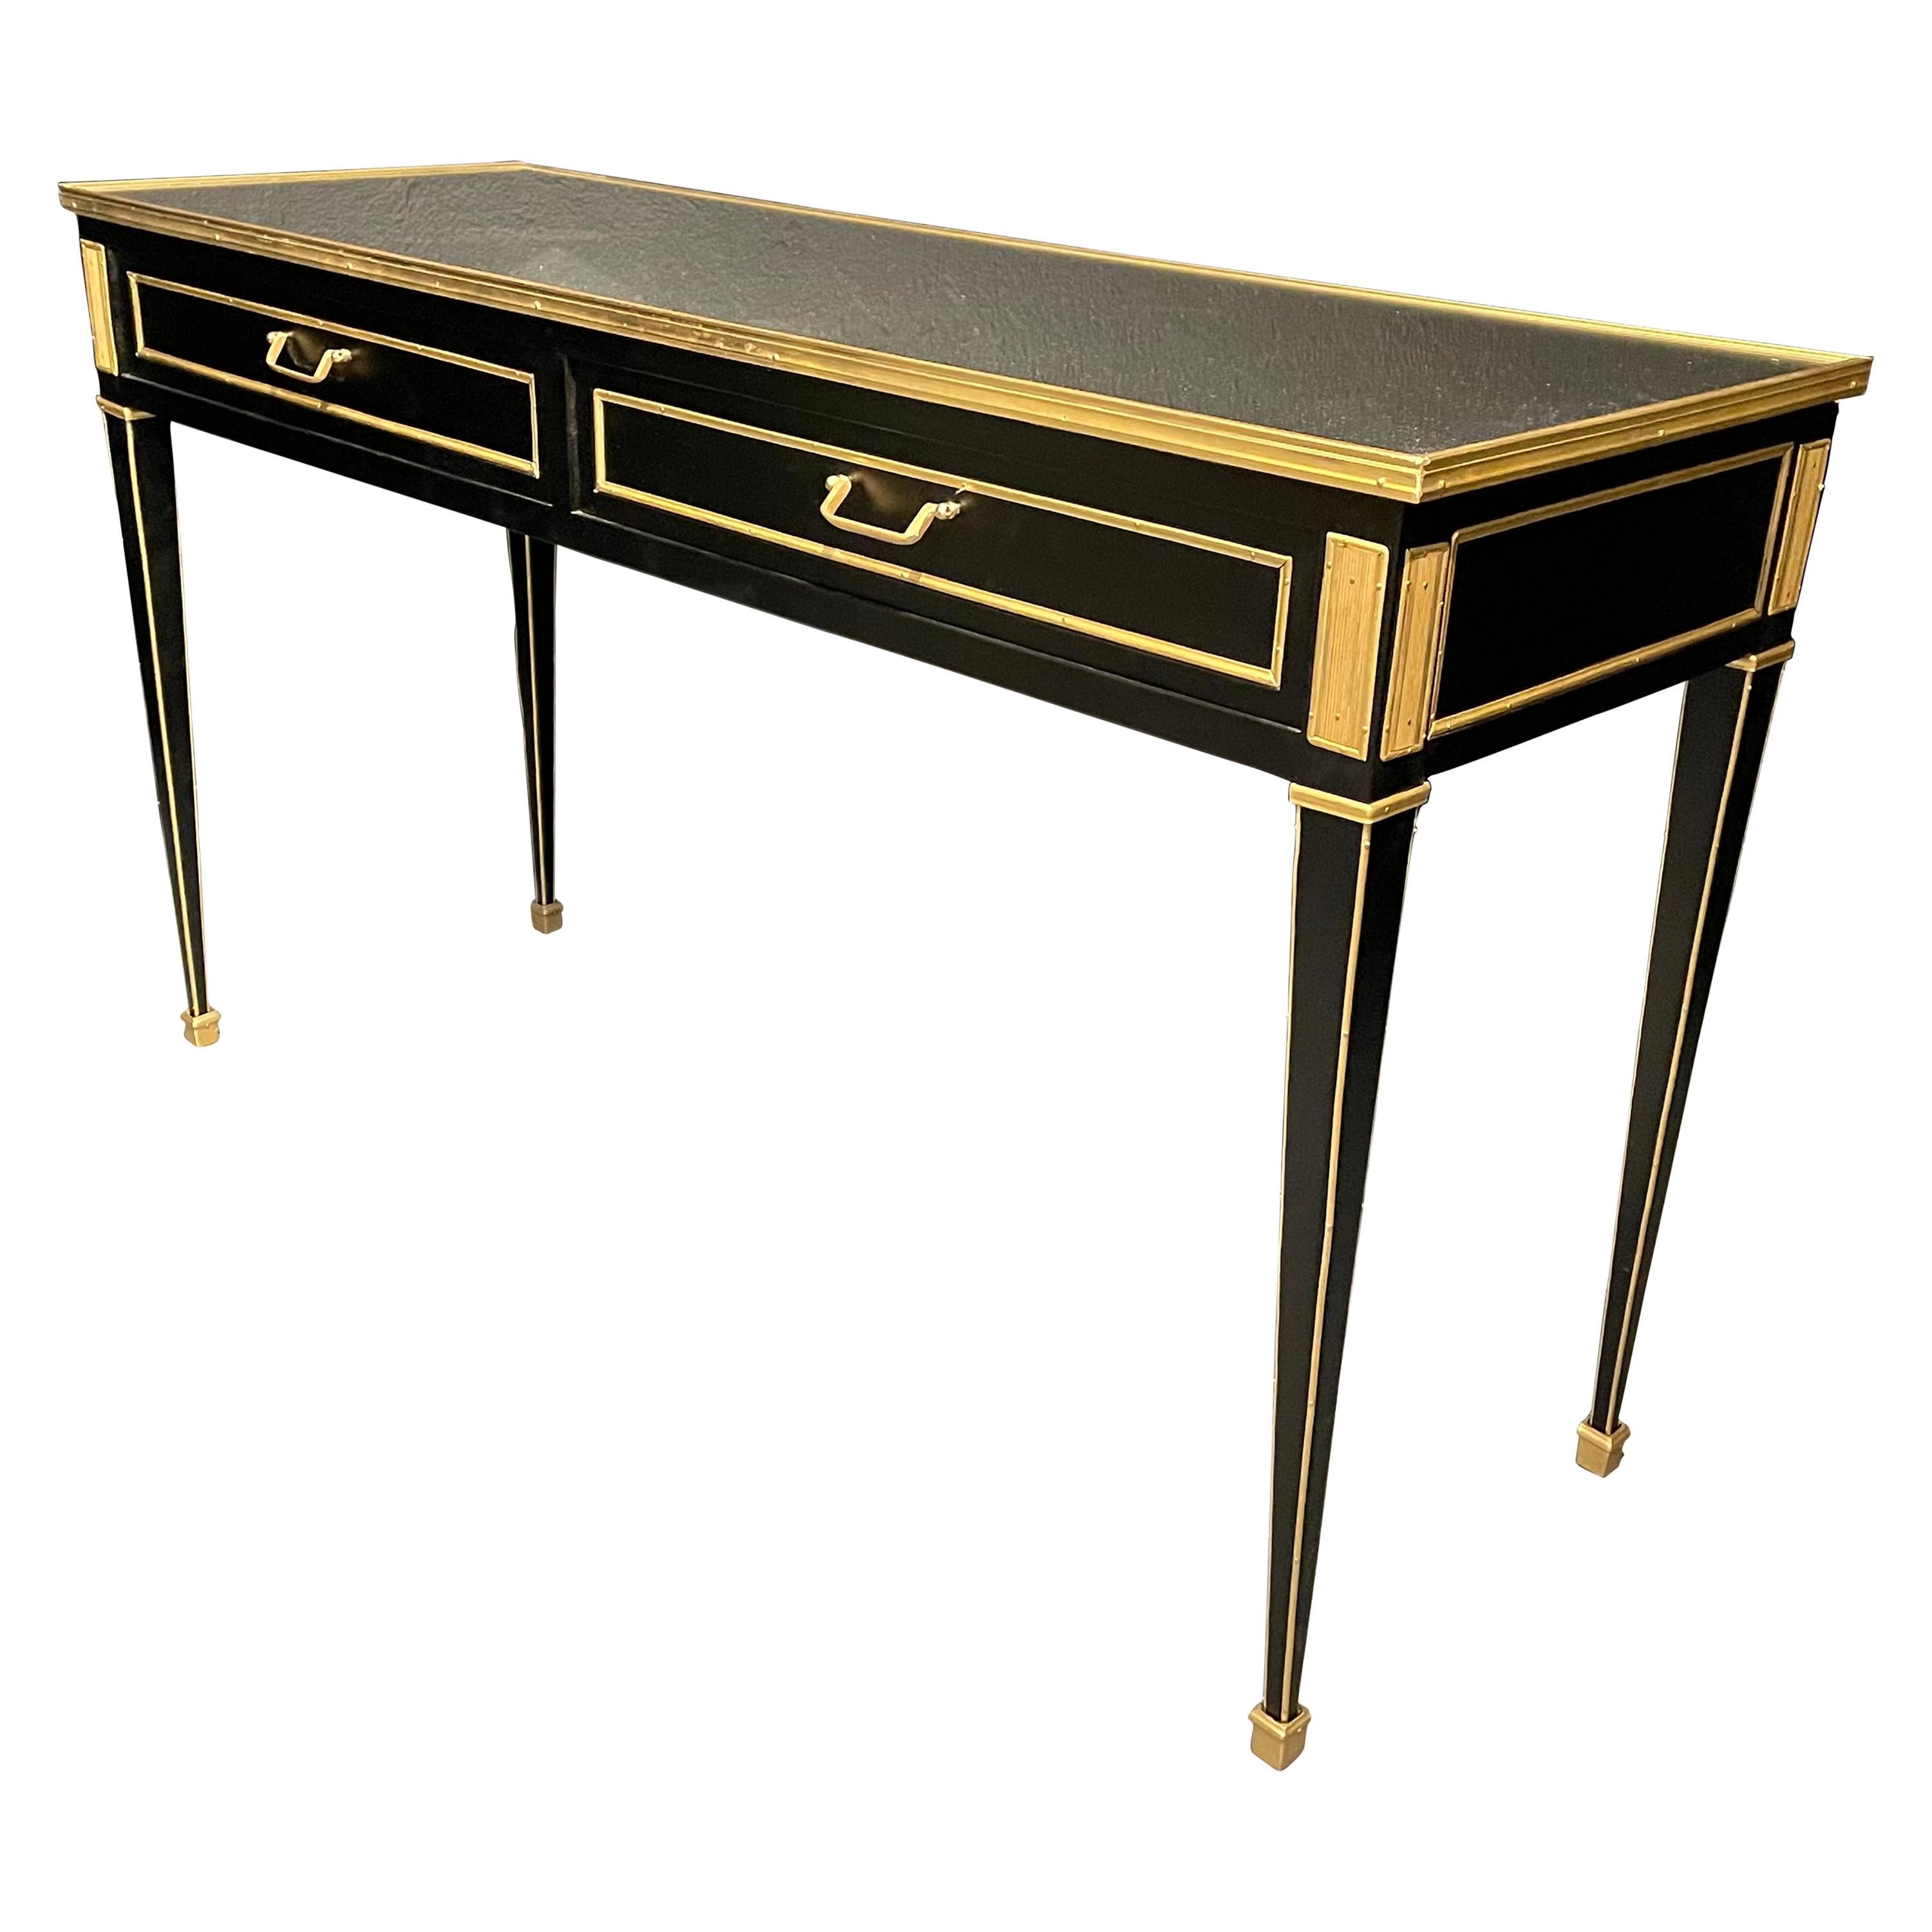 Ebony Mirrored Console, Sofa or Serving Tables. Hollywood Regency Style